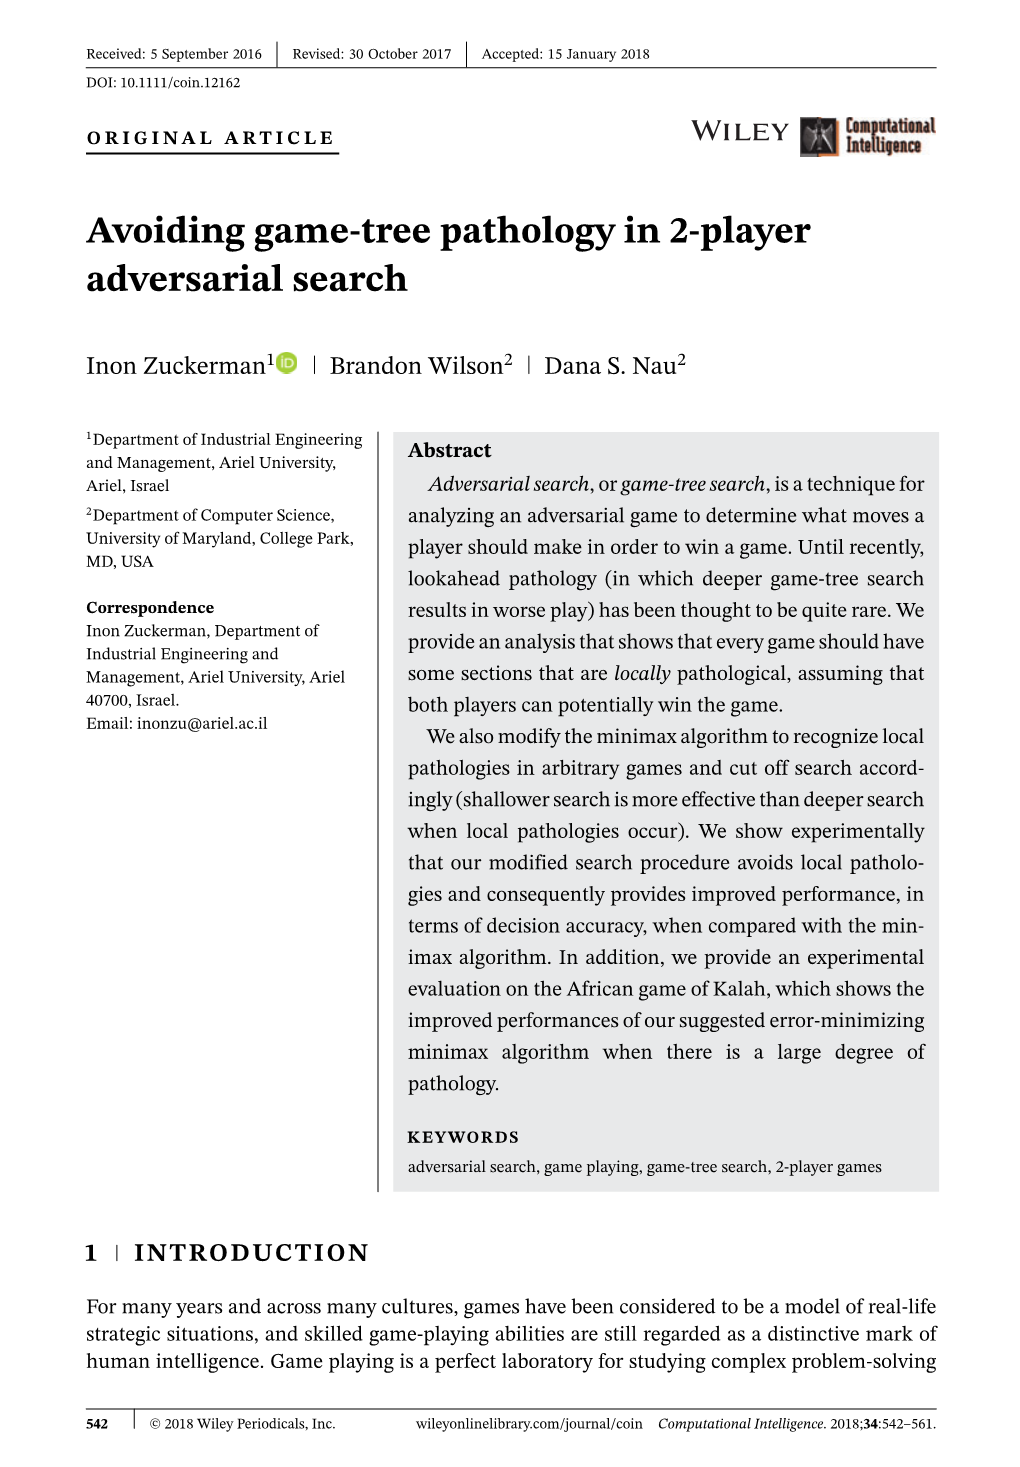 Avoiding Game-Tree Pathology in 2-Player Adversarial Search